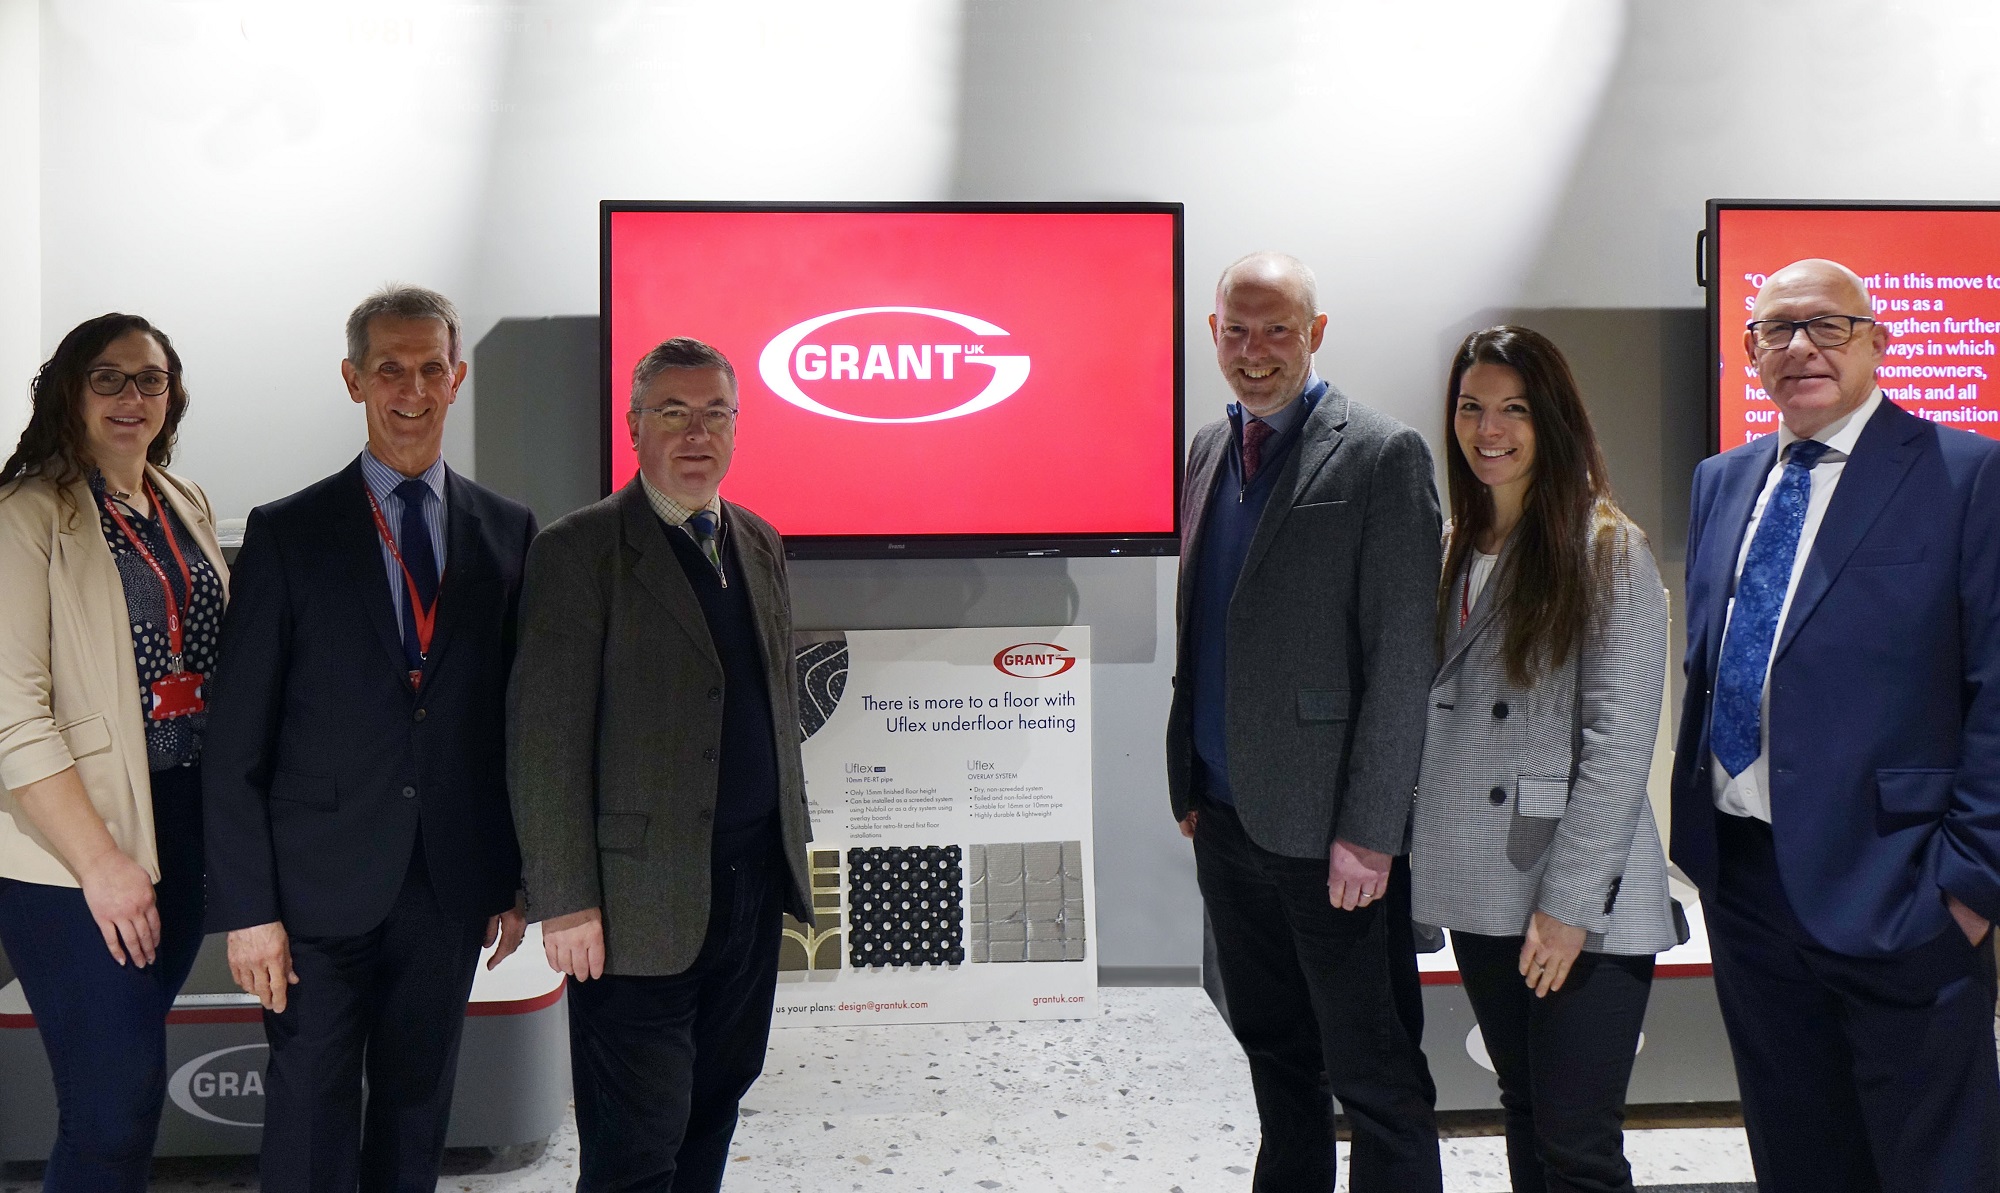 Justin Tomlinson MP And Robert Buckland MP Visit Grant UK’s New HQ In Swindon